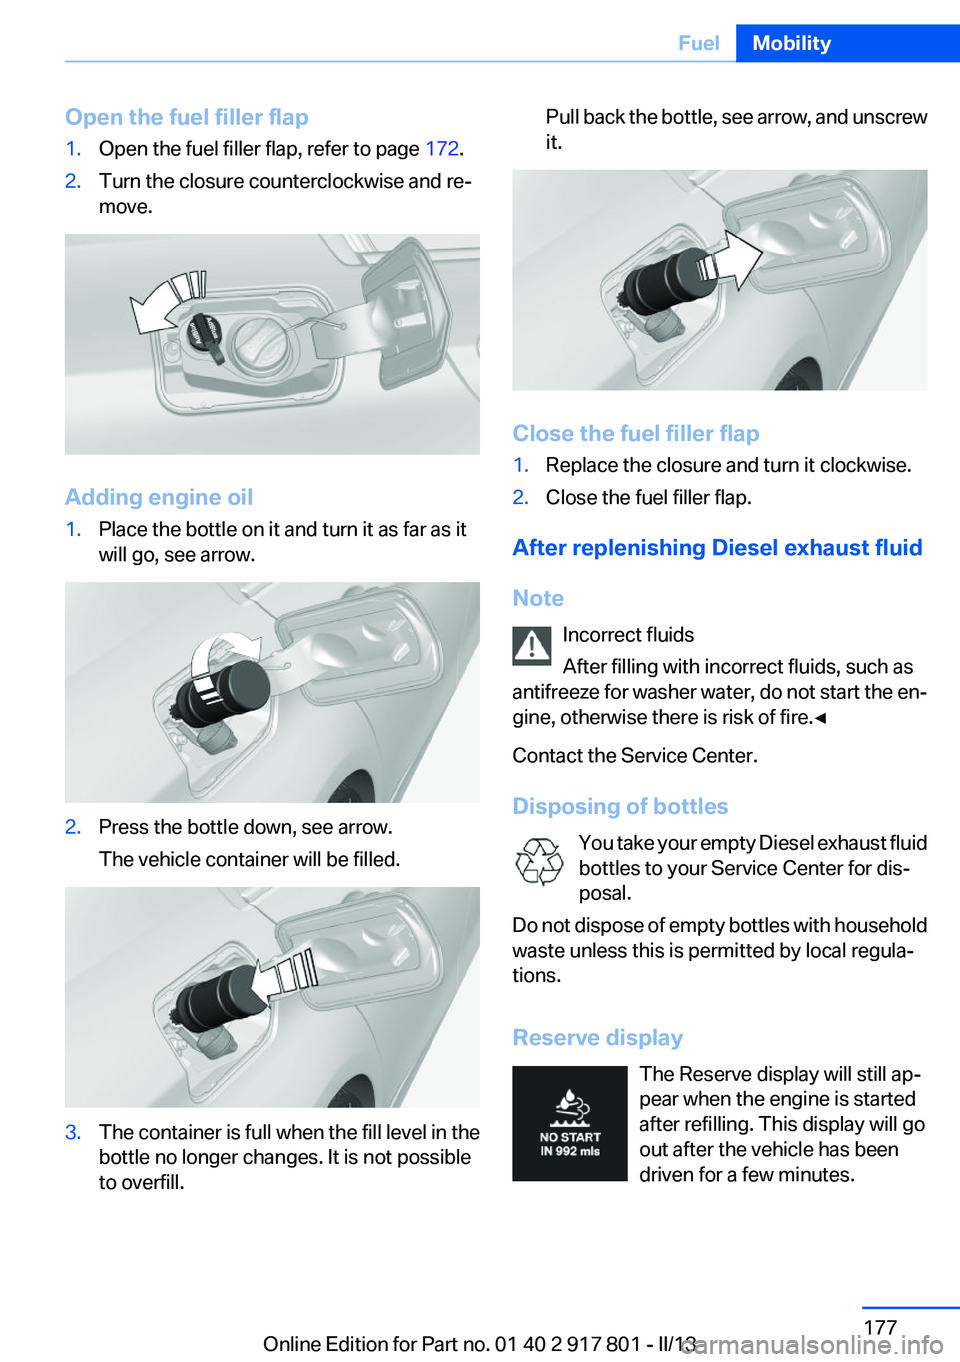 BMW 335I 2013  Owners Manual Open the fuel filler flap1.Open the fuel filler flap, refer to page 172.2.Turn the closure counterclockwise and re‐
move.
Adding engine oil
1.Place the bottle on it and turn it as far as it
will go,